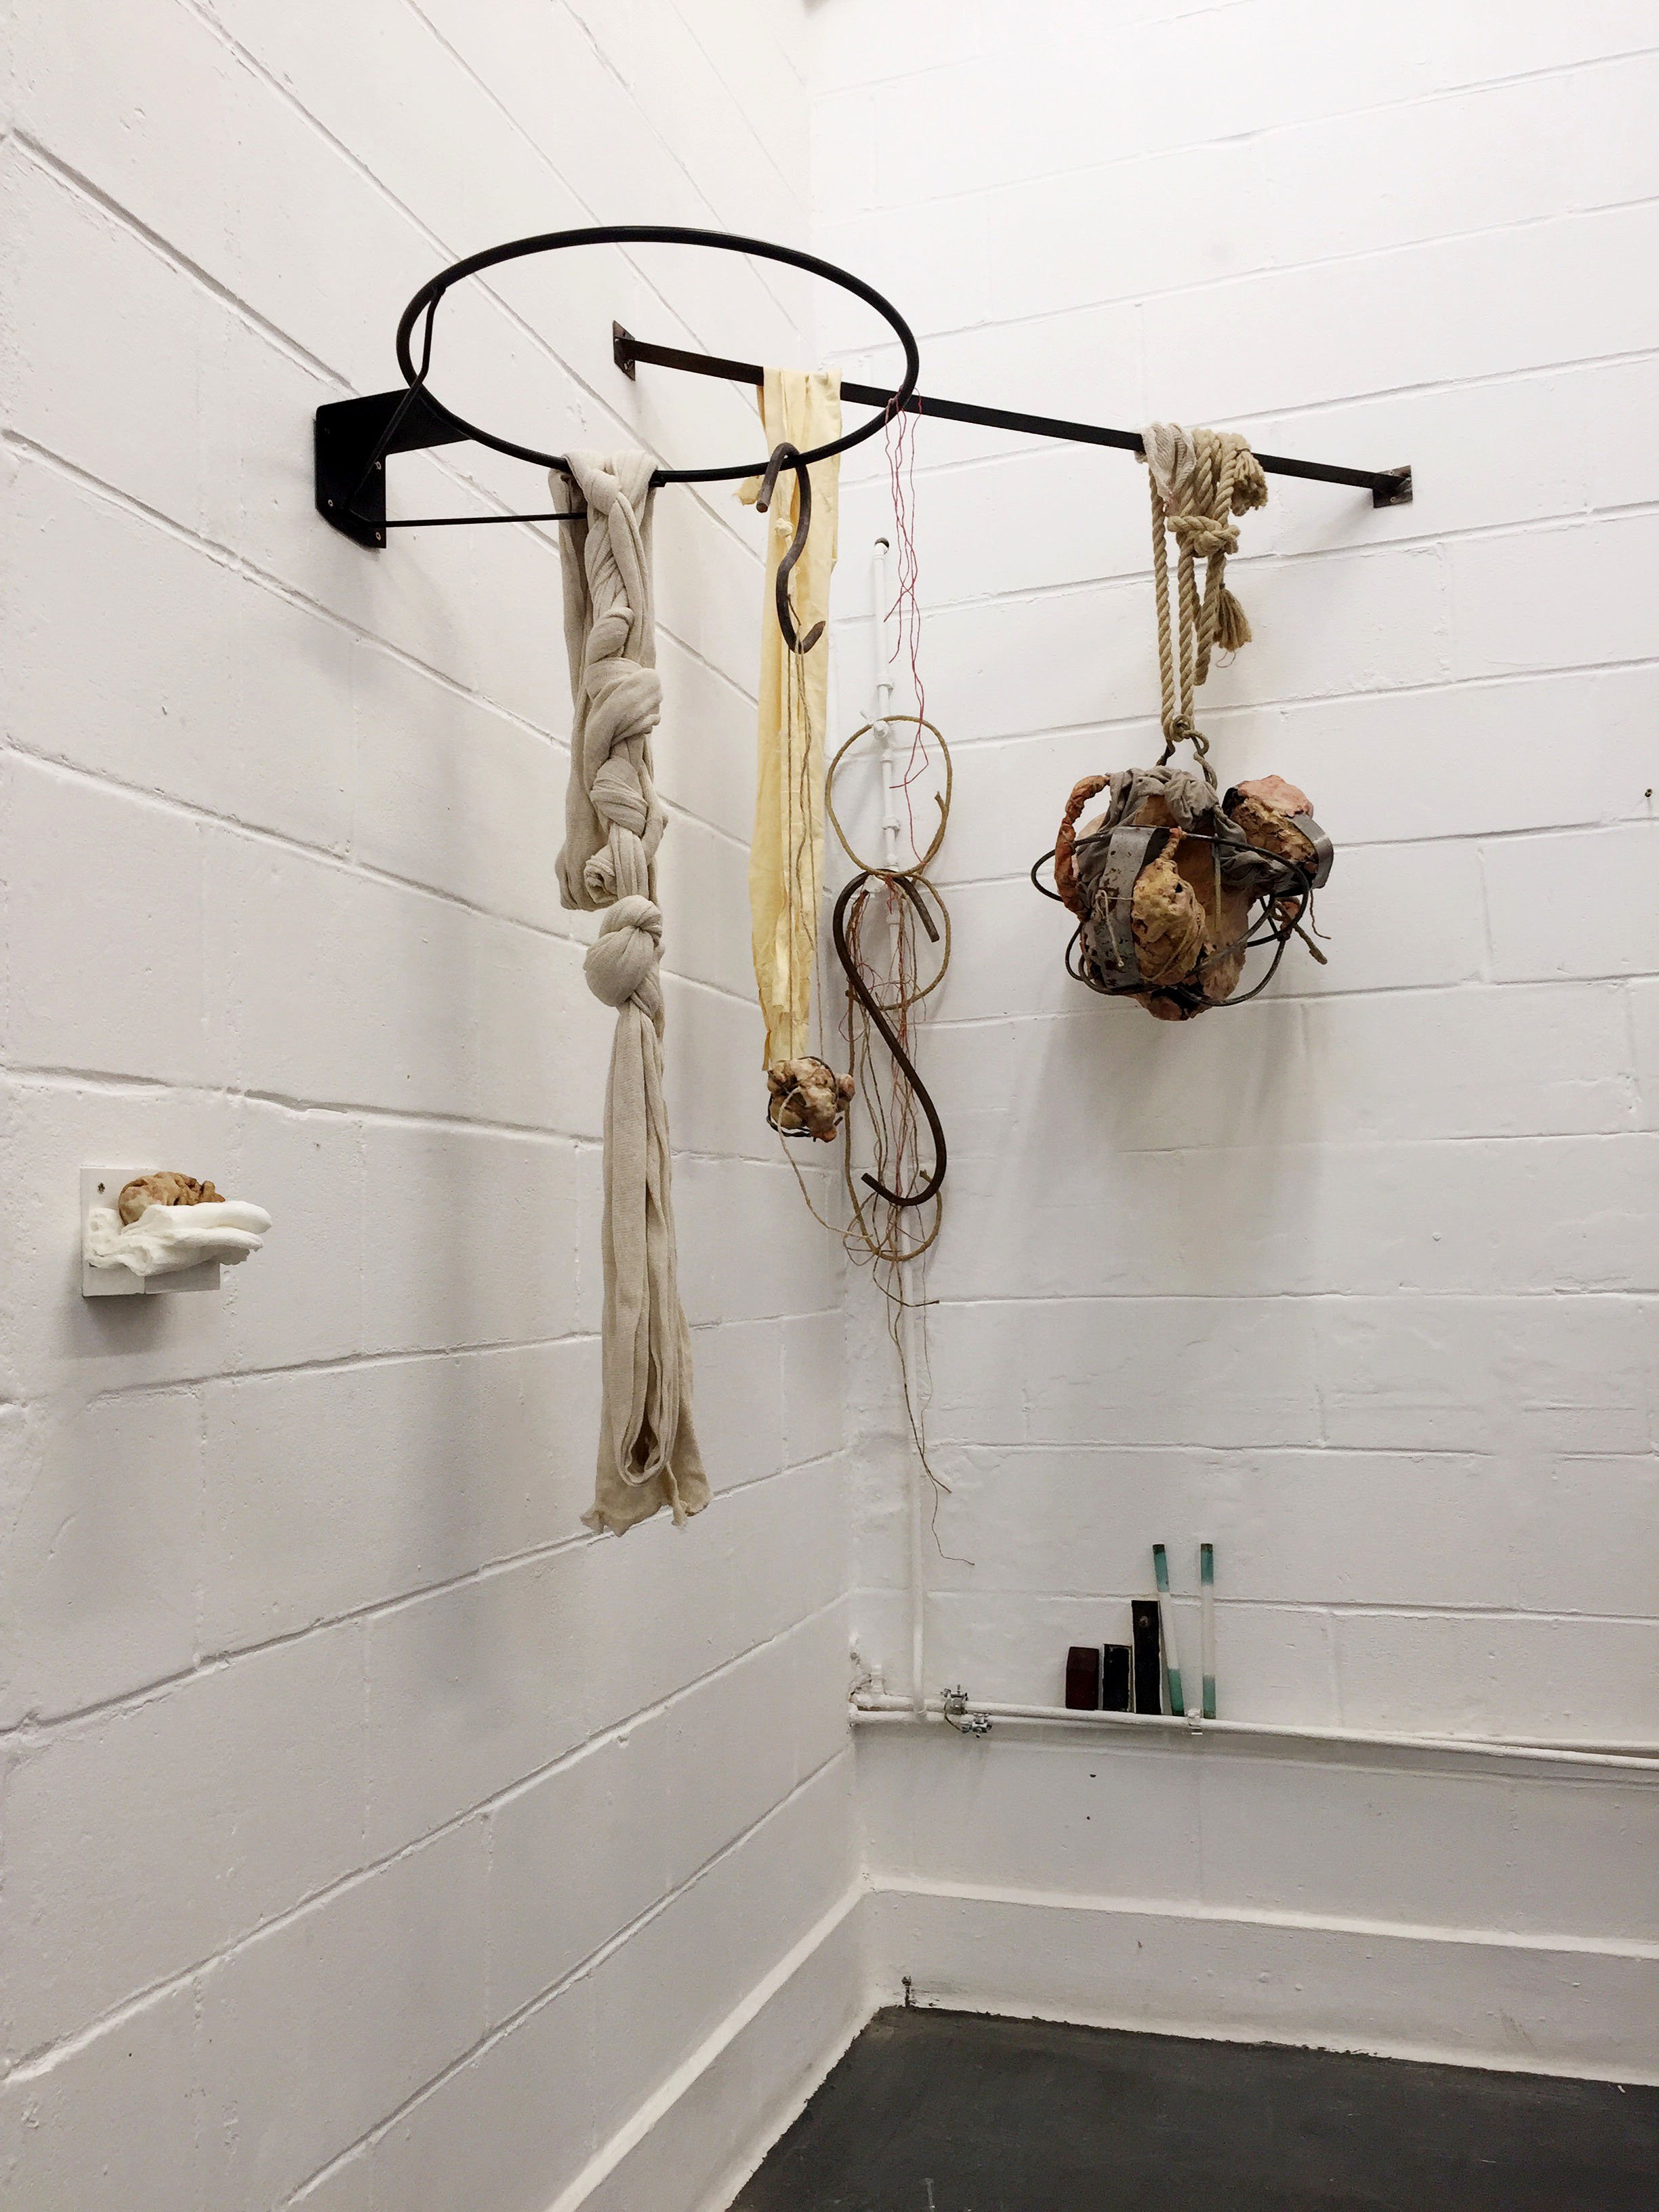   Intestinos,  2018, Installation, air dry clay, wax, steel frame, fabric, rope, chains. Dimensions variable.  